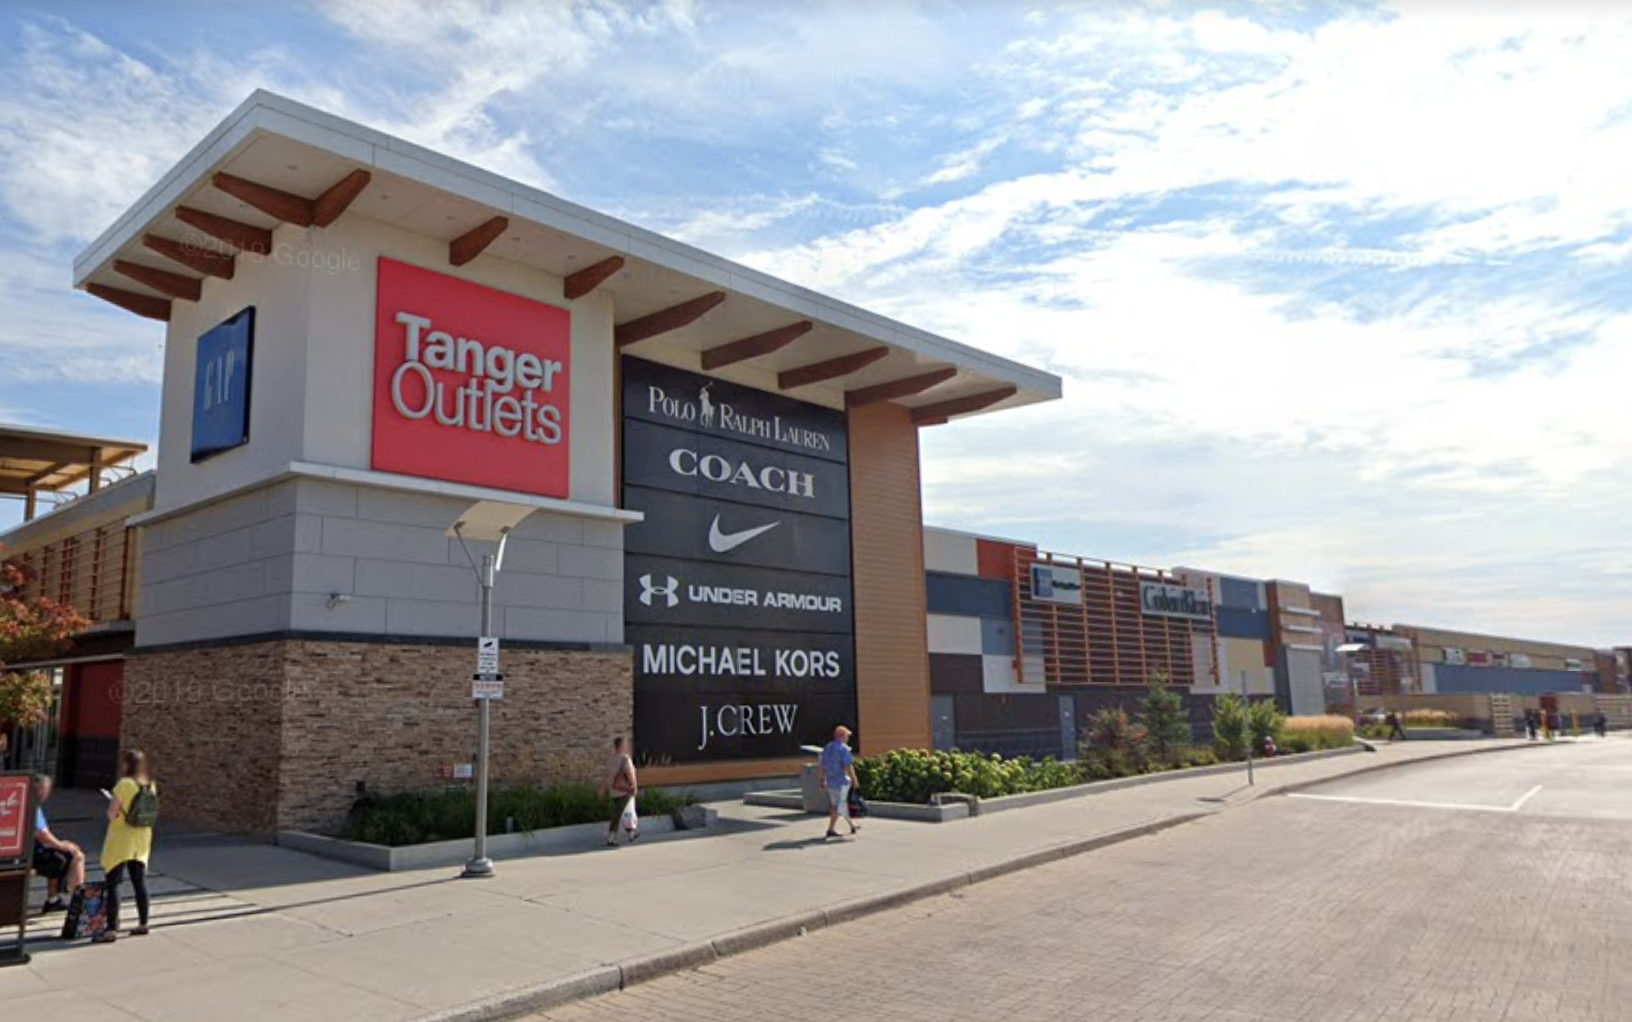 Ottawa's Tanger Outlets cleared for 